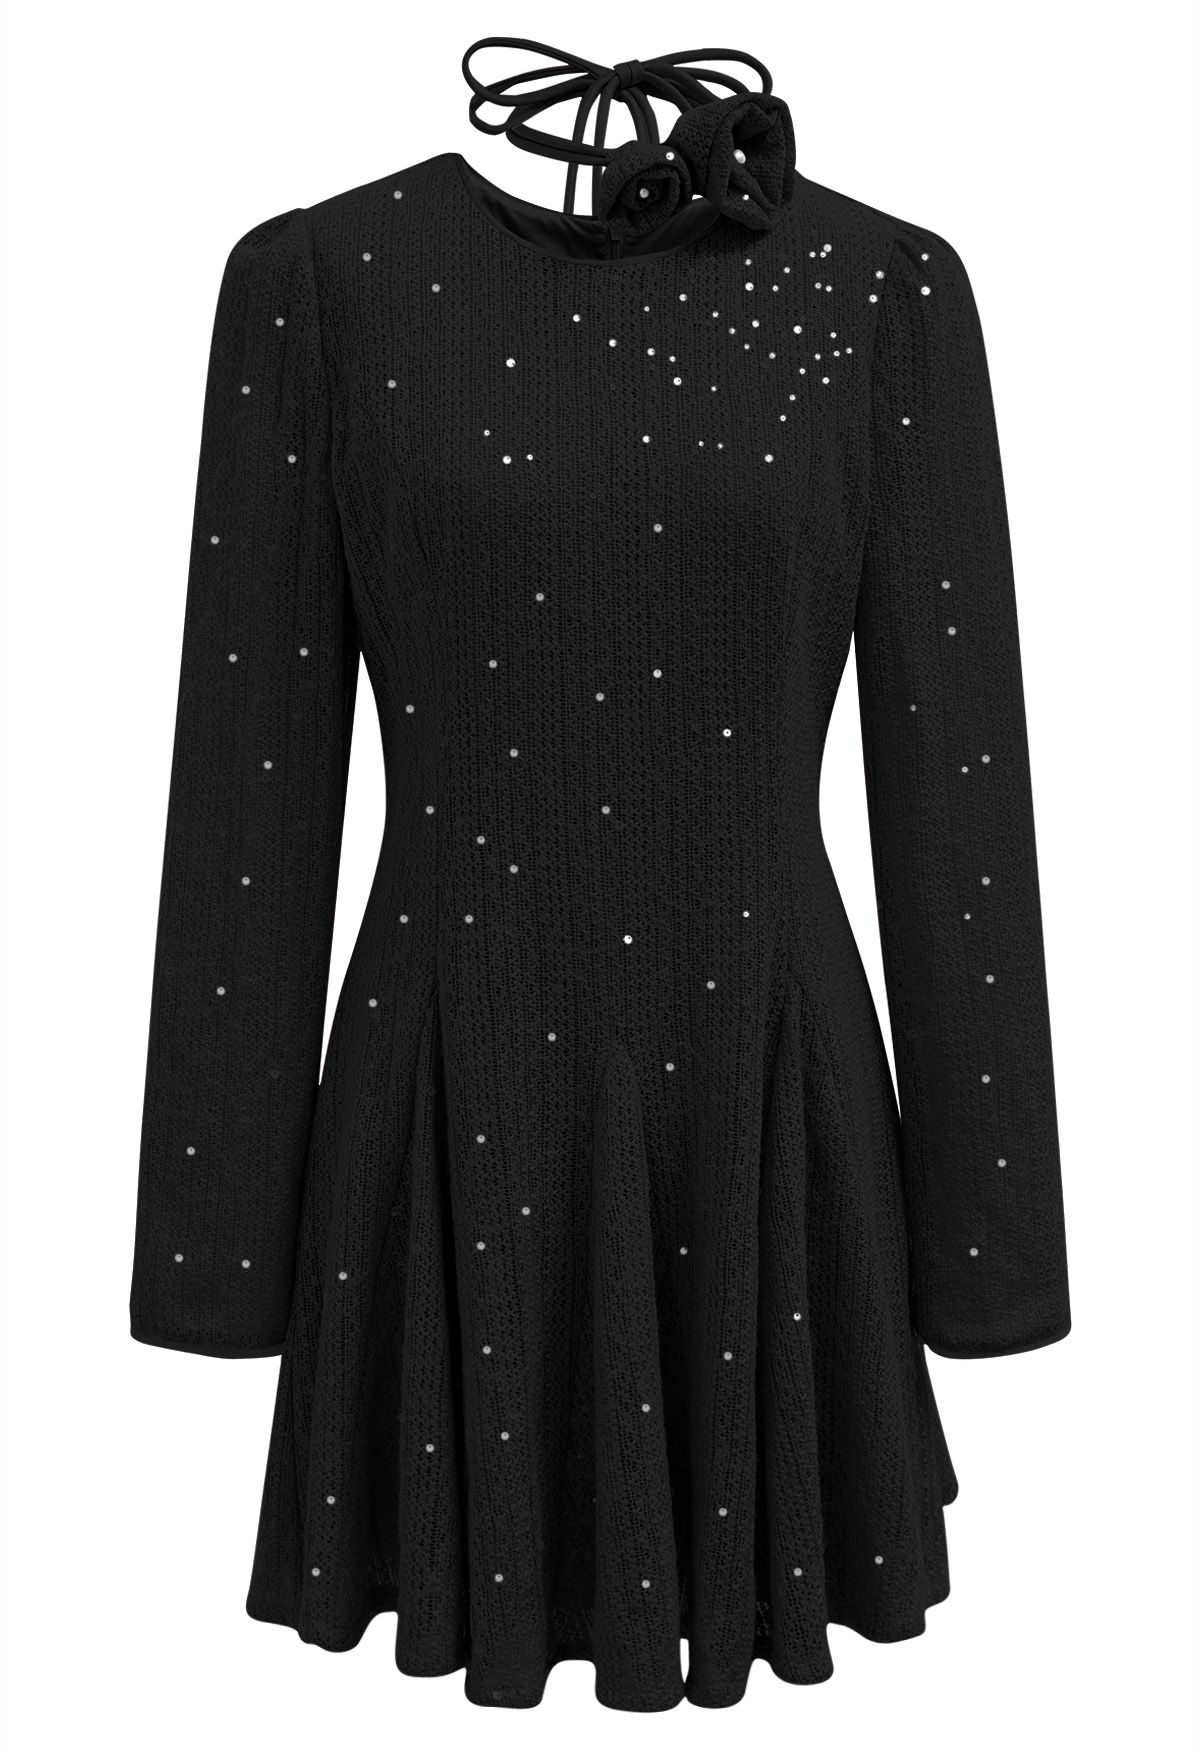 Glitter Sequin Frilling Dress with Choker in Black